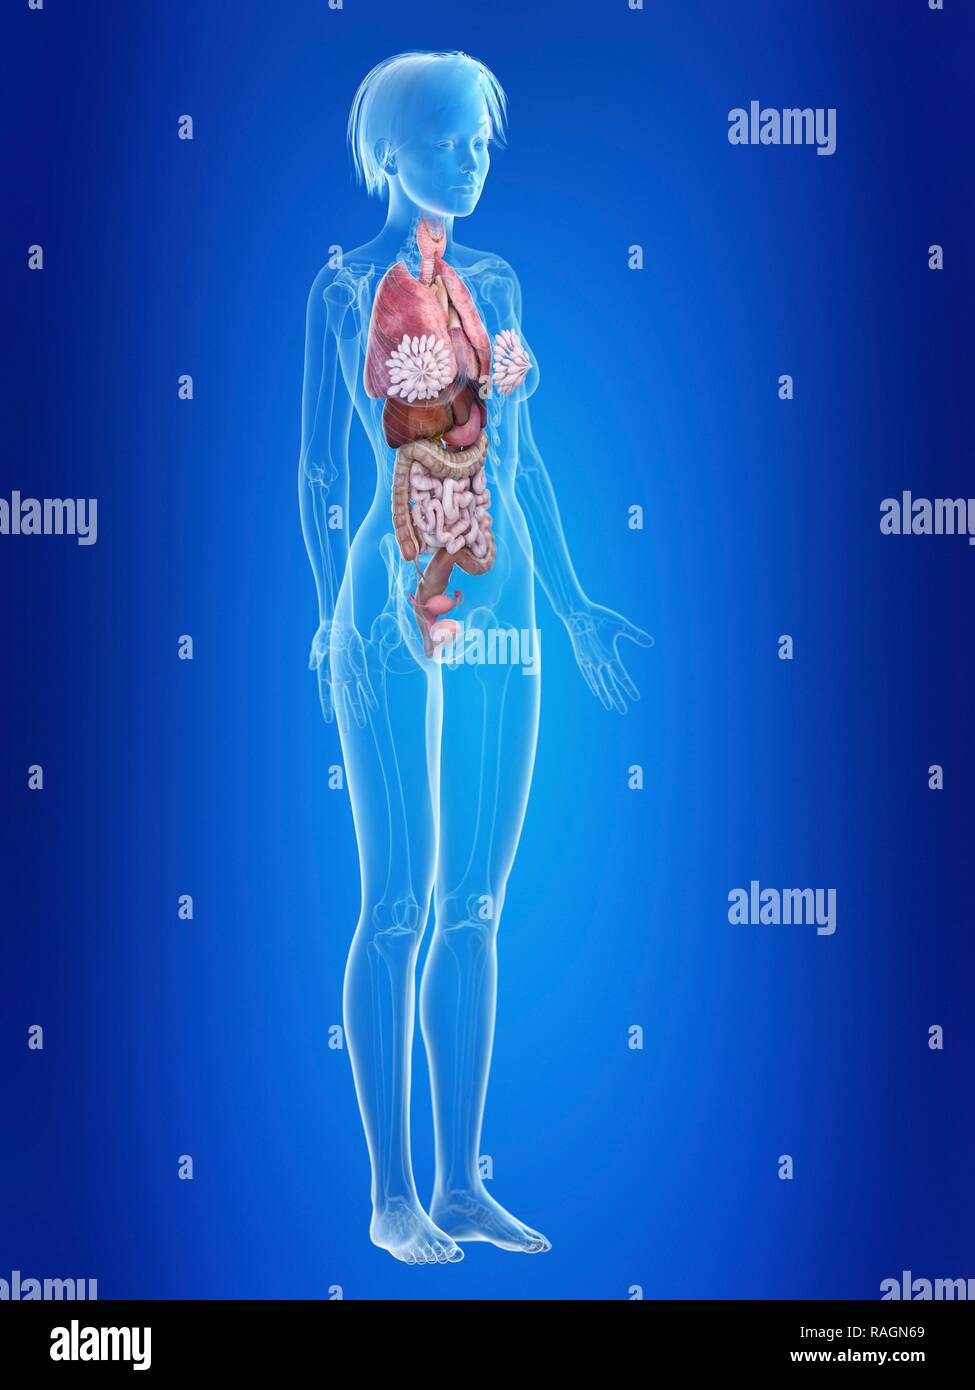 Illustration of a woman's organs Stock Photo - Alamy